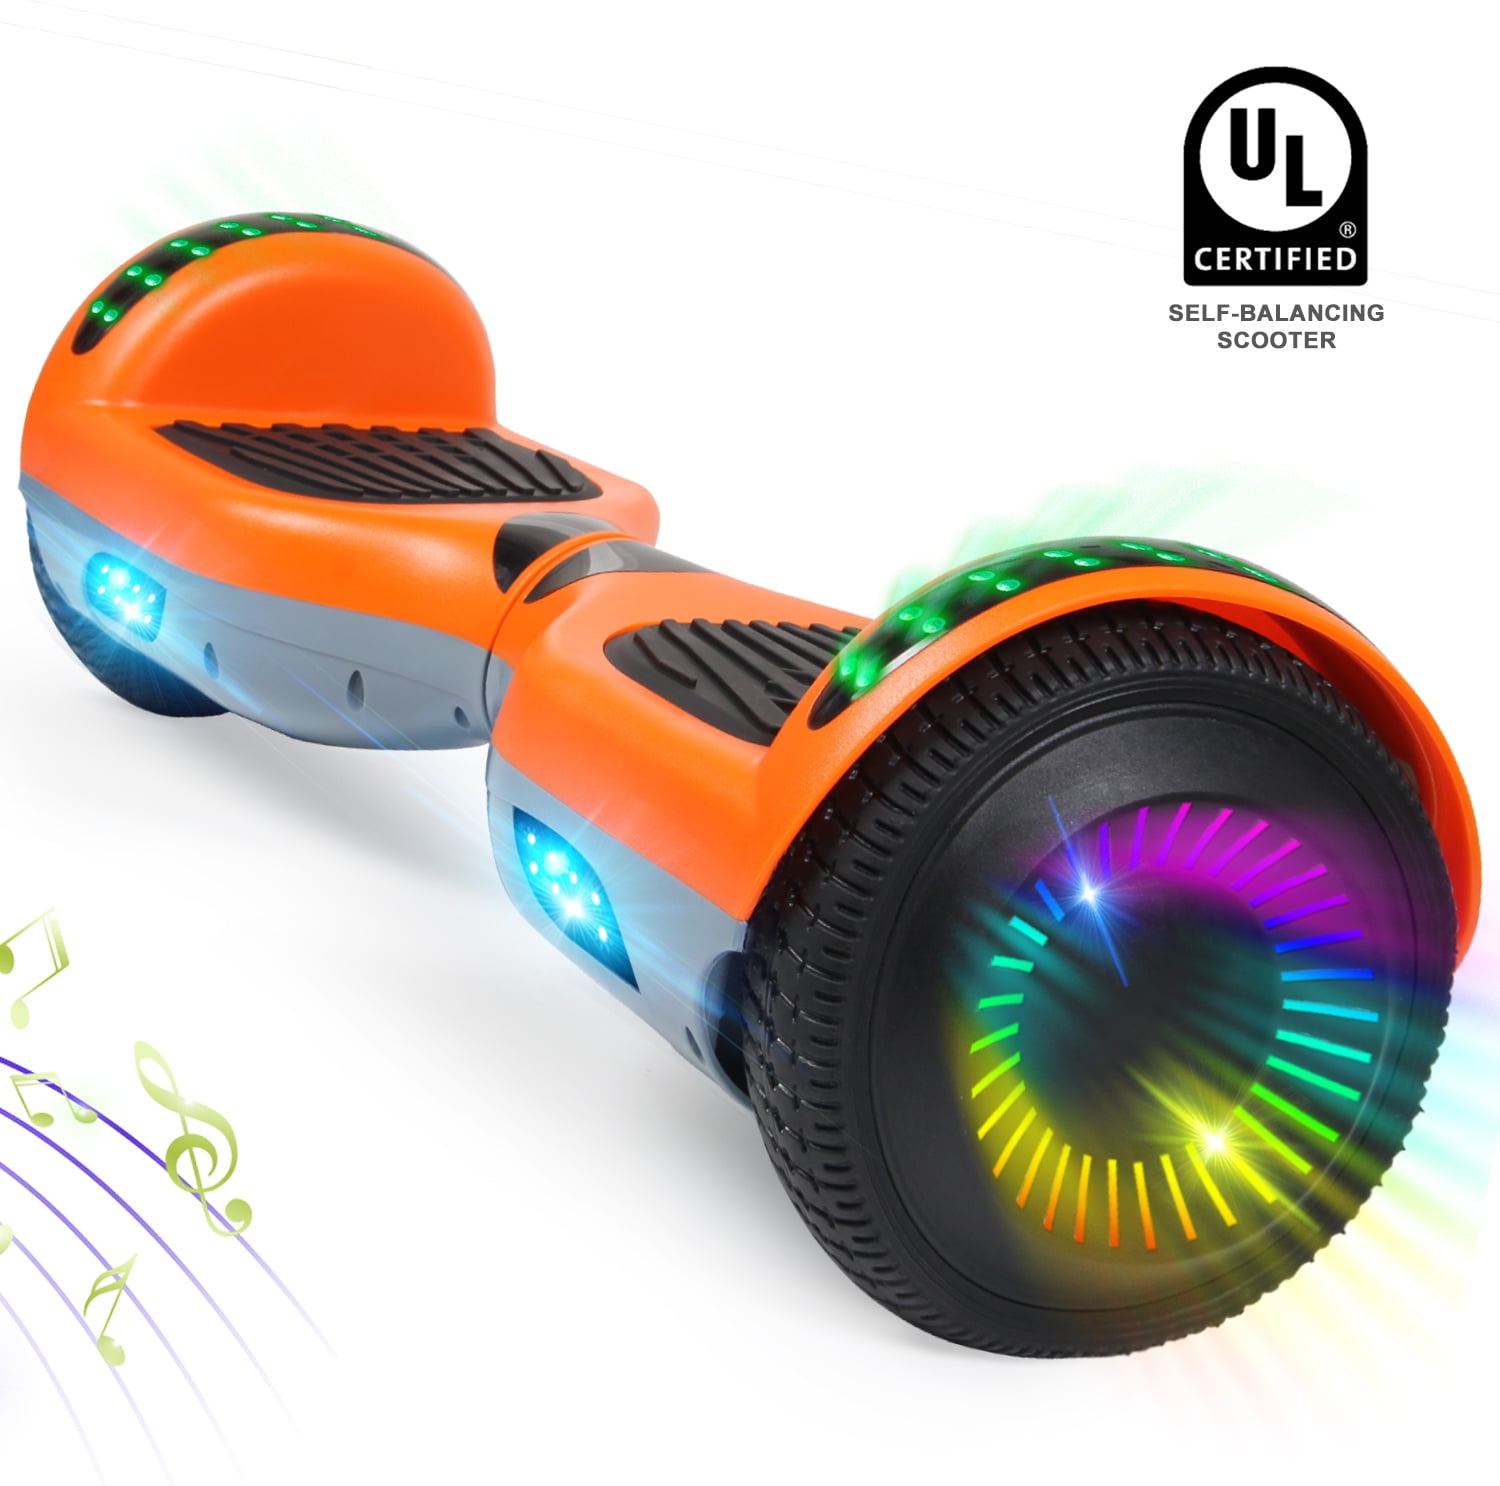 Beston Sports Upgraded LED Series Hoverboard for Kids with Built in Bluetooth Speaker 